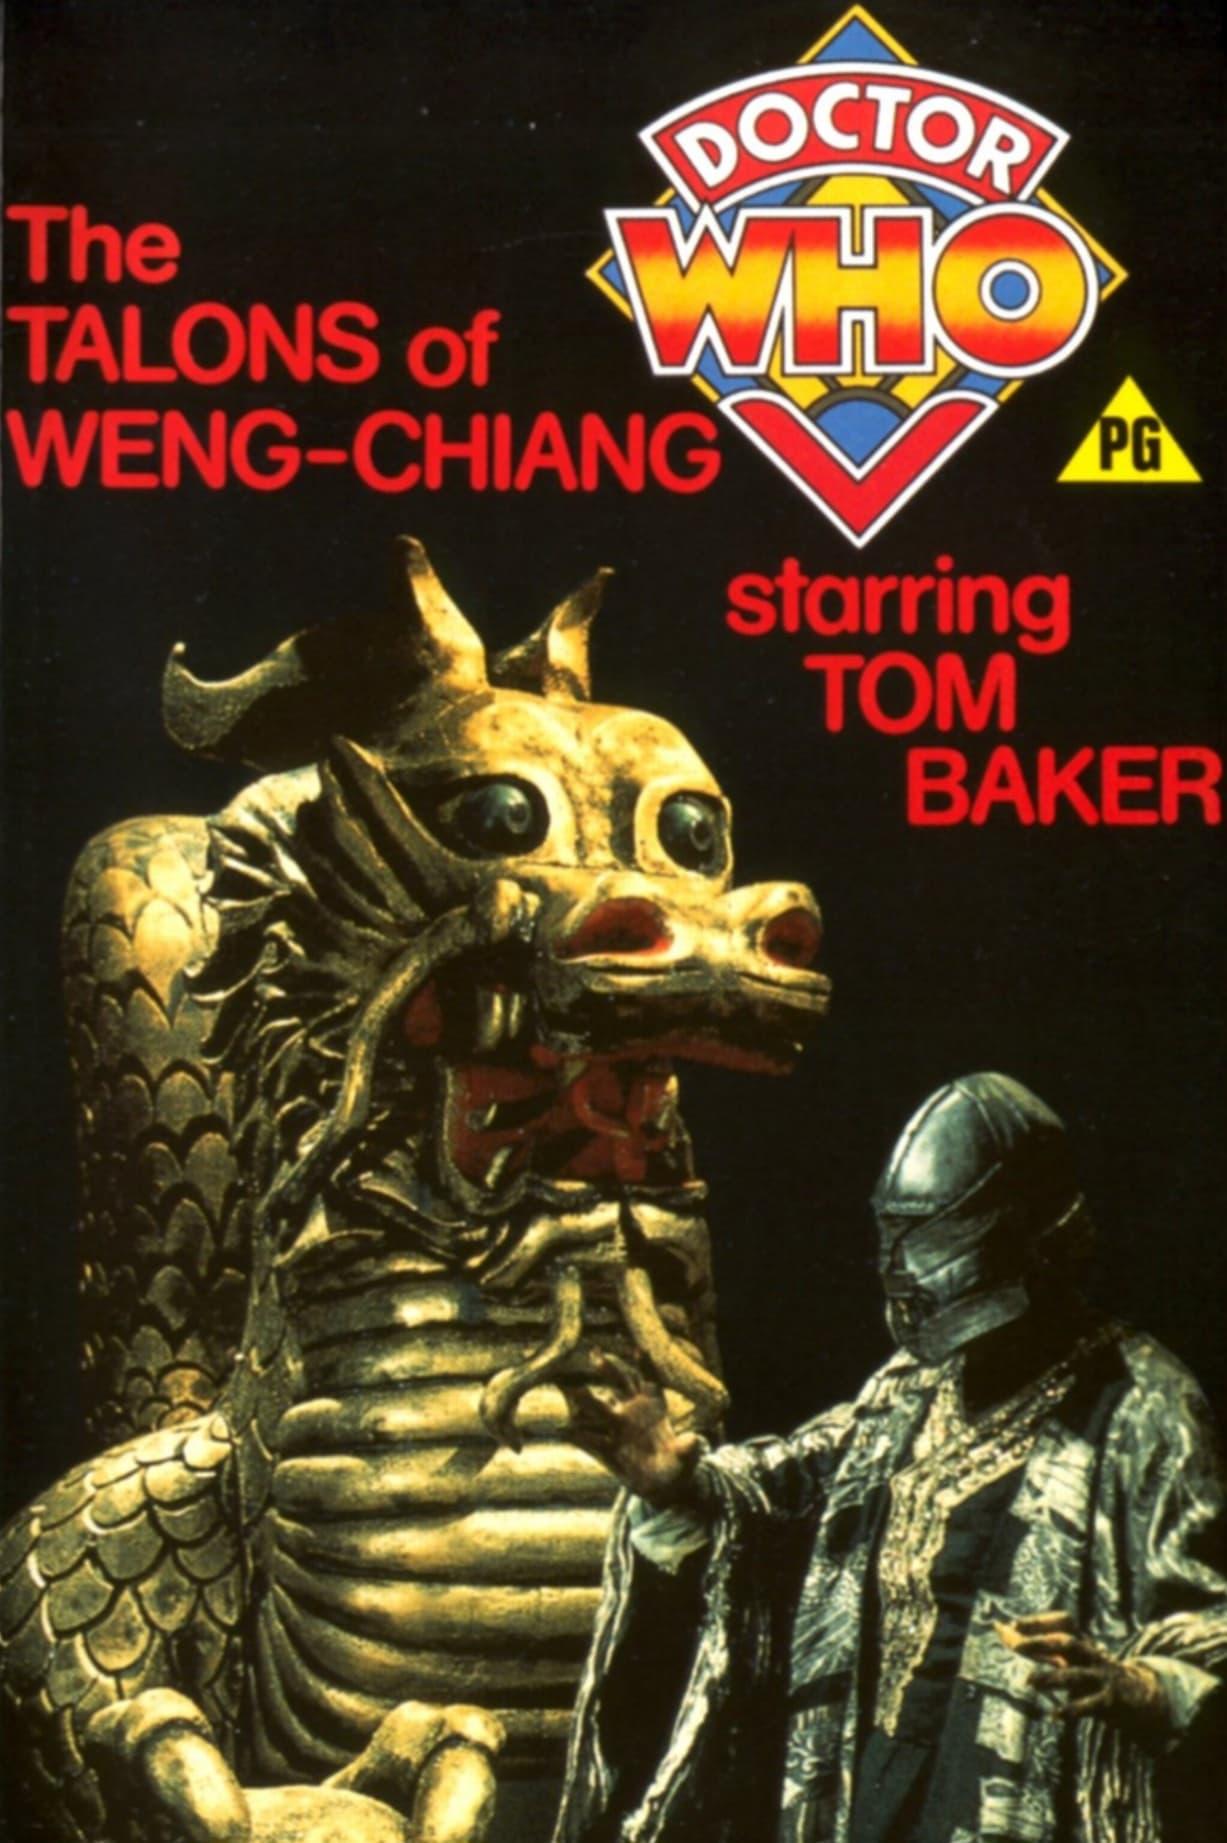 Doctor Who: The Talons of Weng-Chiang poster